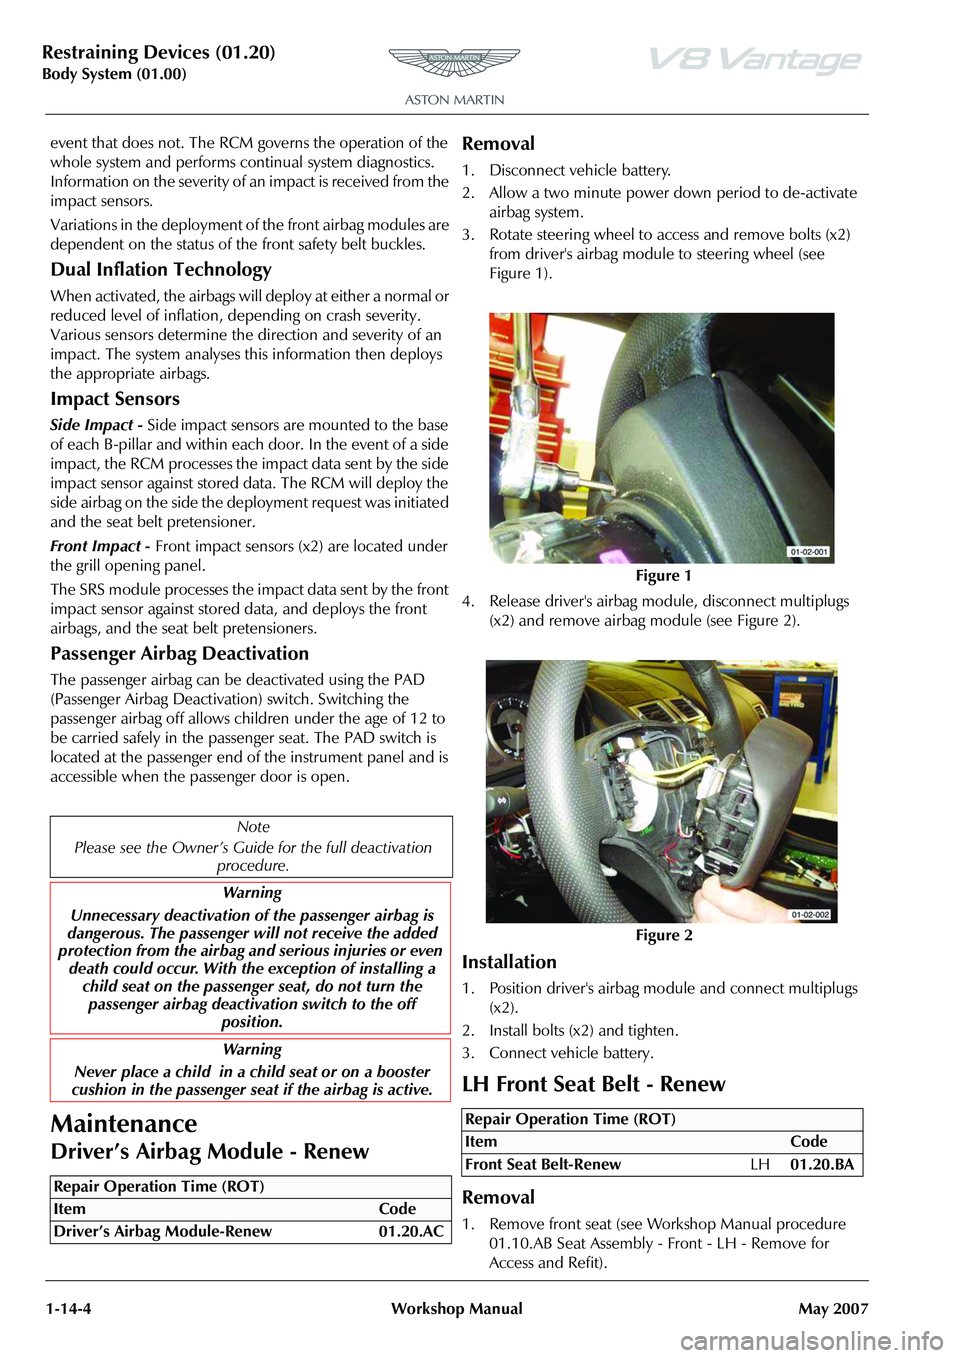 ASTON MARTIN V8 VANTAGE 2010 Owners Guide Restraining Devices (01.20)
Body System (01.00)1-14-4 Workshop Manual May 2007
event that does not. The RCM governs the operation of the 
whole system and performs continual system diagnostics. 
Infor